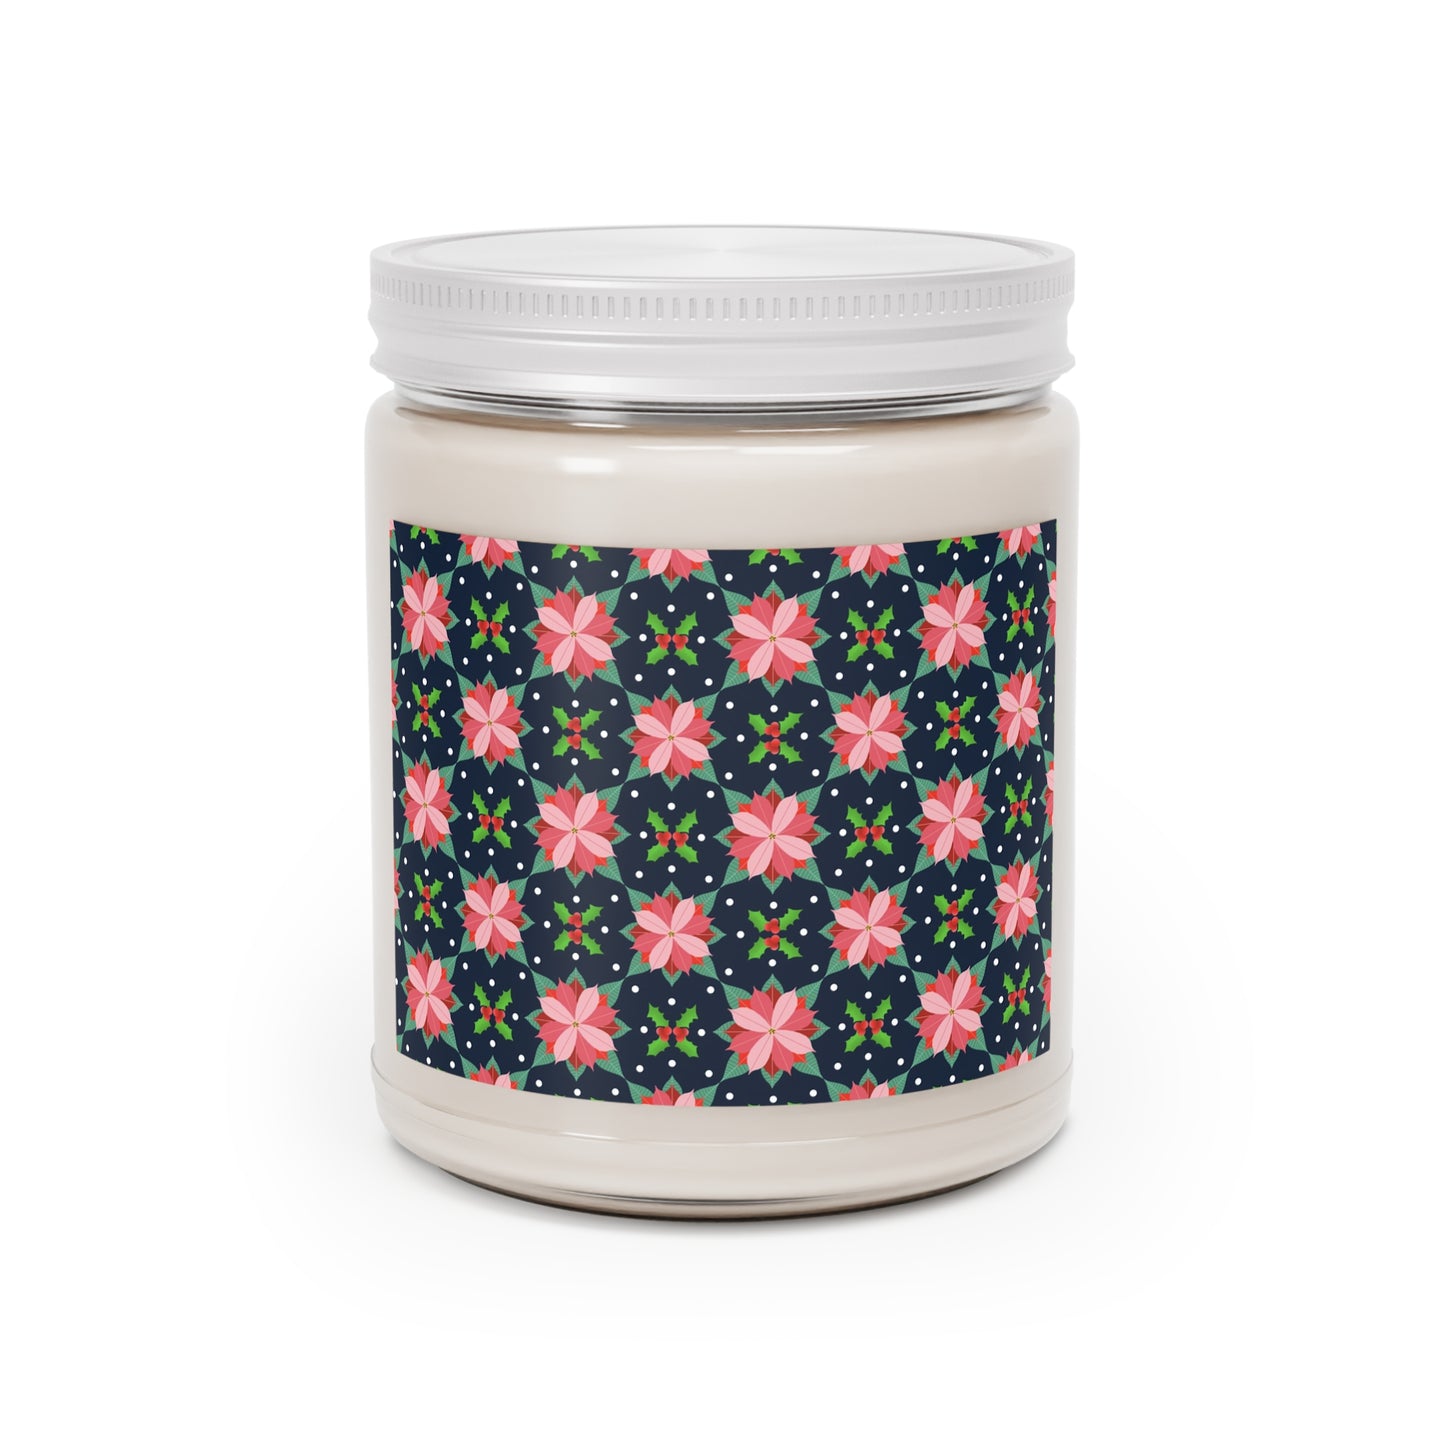 Poinsettias Scented Candles, 9oz